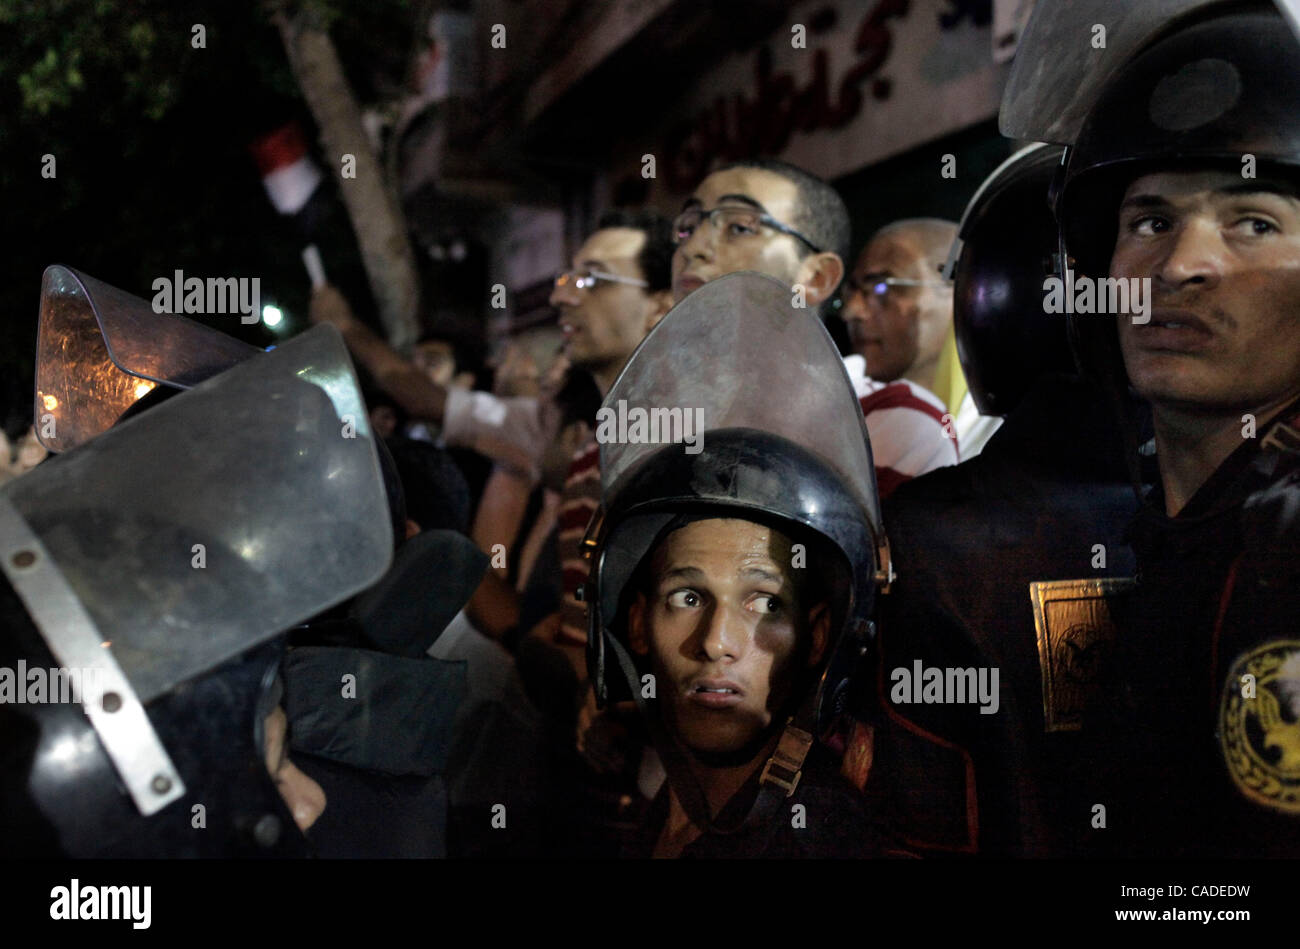 Sep 21, 2010 - Cairo, Egypt - Protesters chanted against Egyptian president H. Mubarak and the possible succession of his son Gamal to the presidency. They stood outside Abdeen Palace and made references to the 1882 uprising, when Ahmed Orabi declared that Egyptians should no longer be slaves. The p Stock Photo